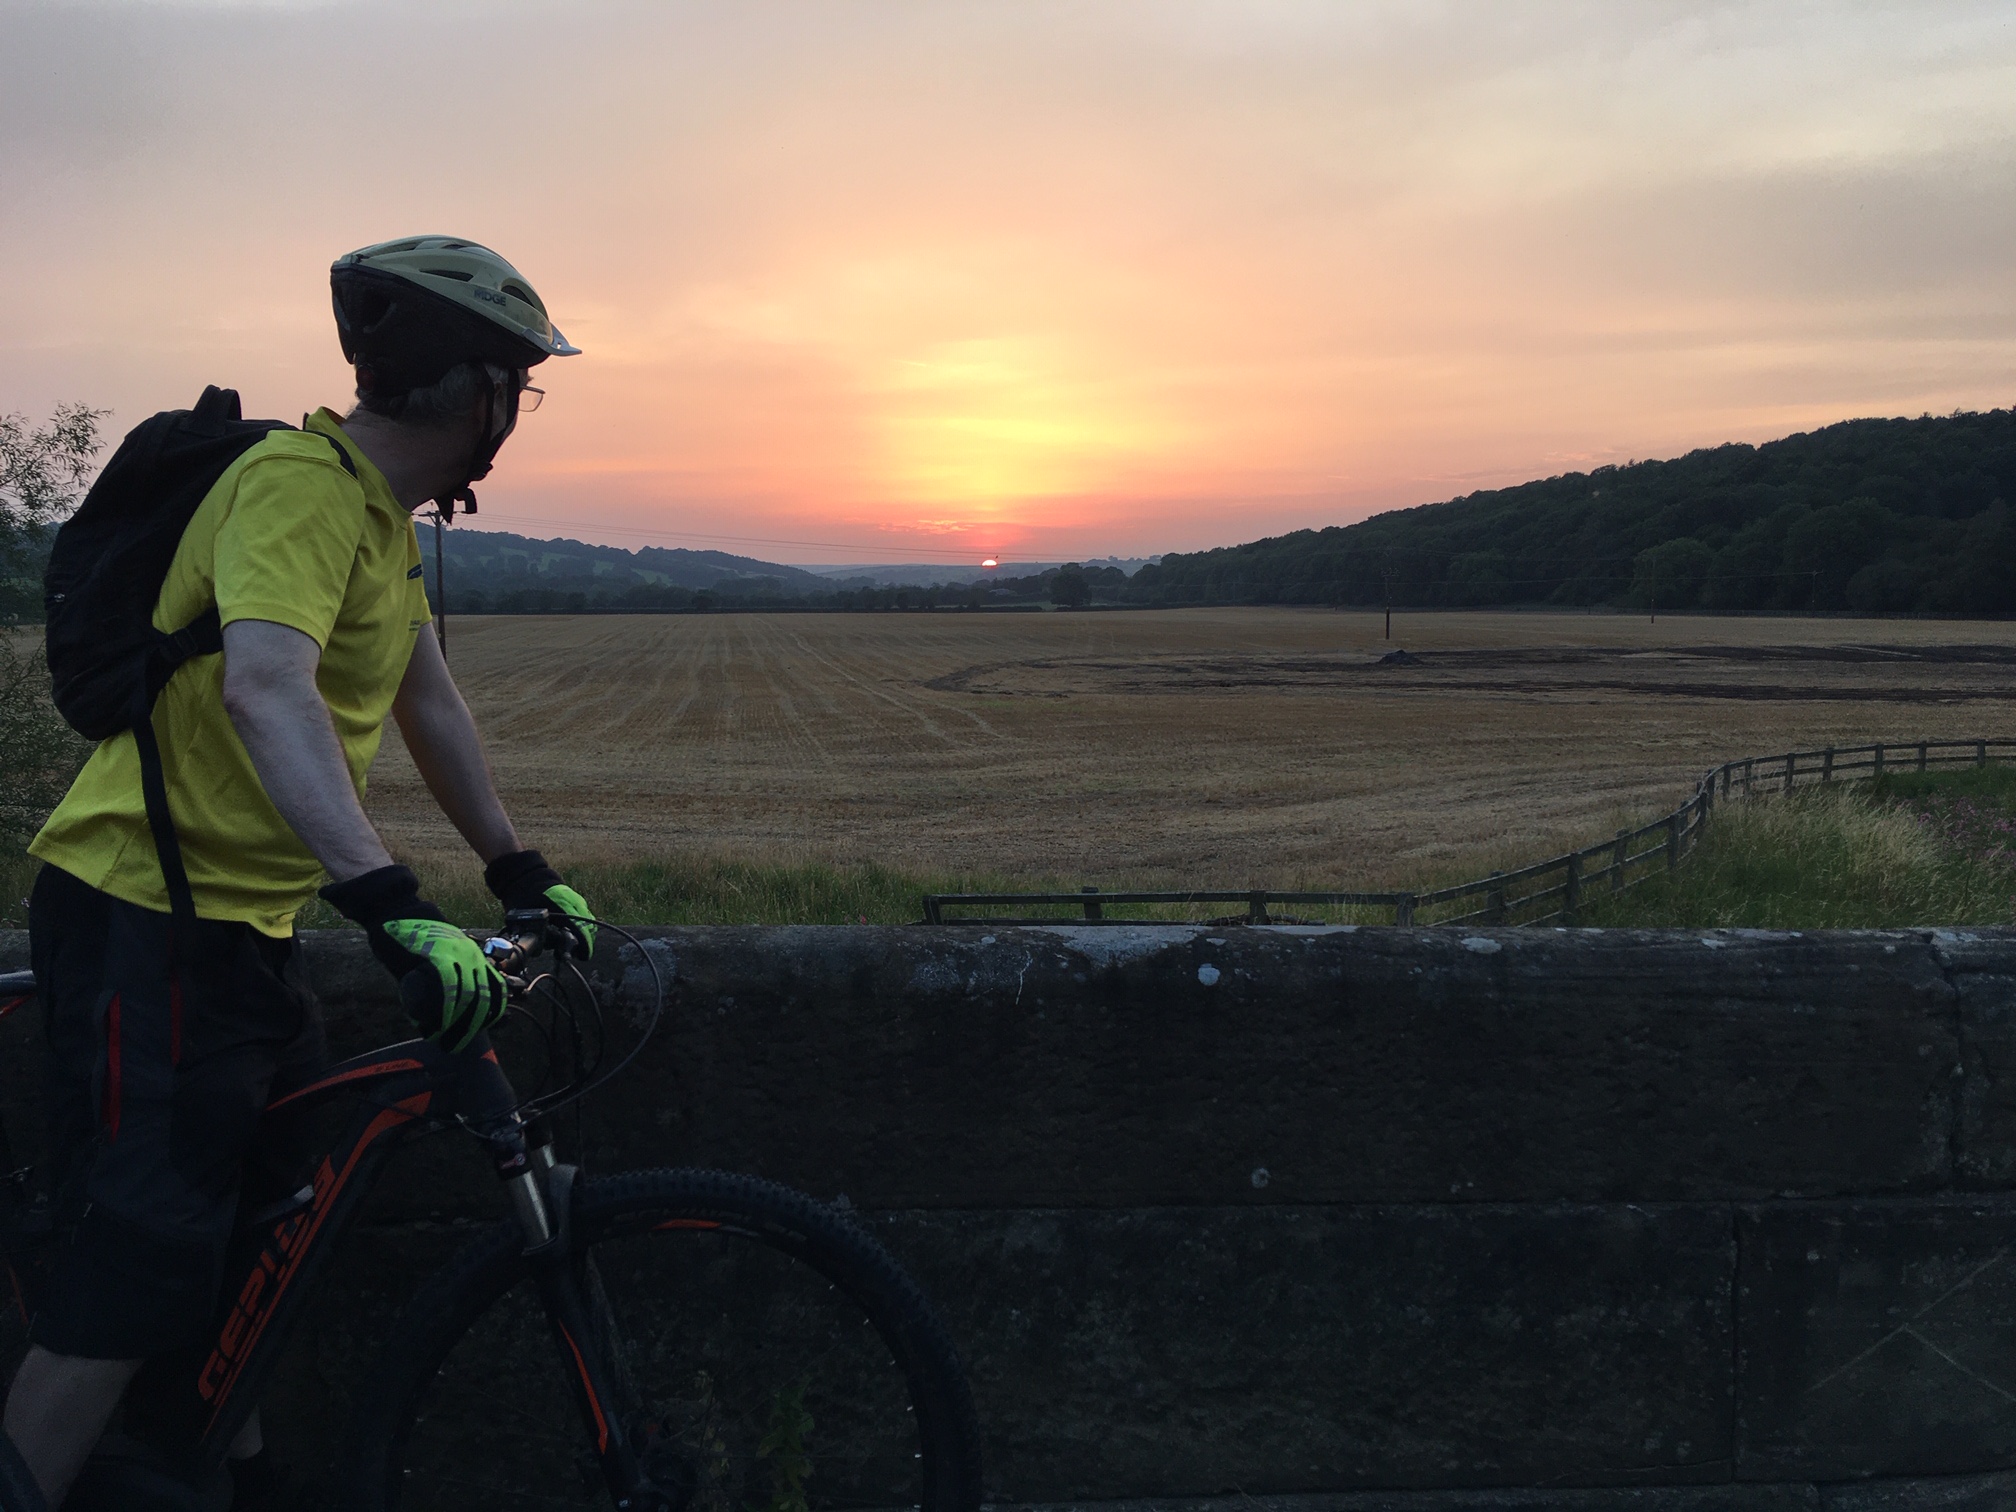 A Yorkshire Sunset - Liferiders-style